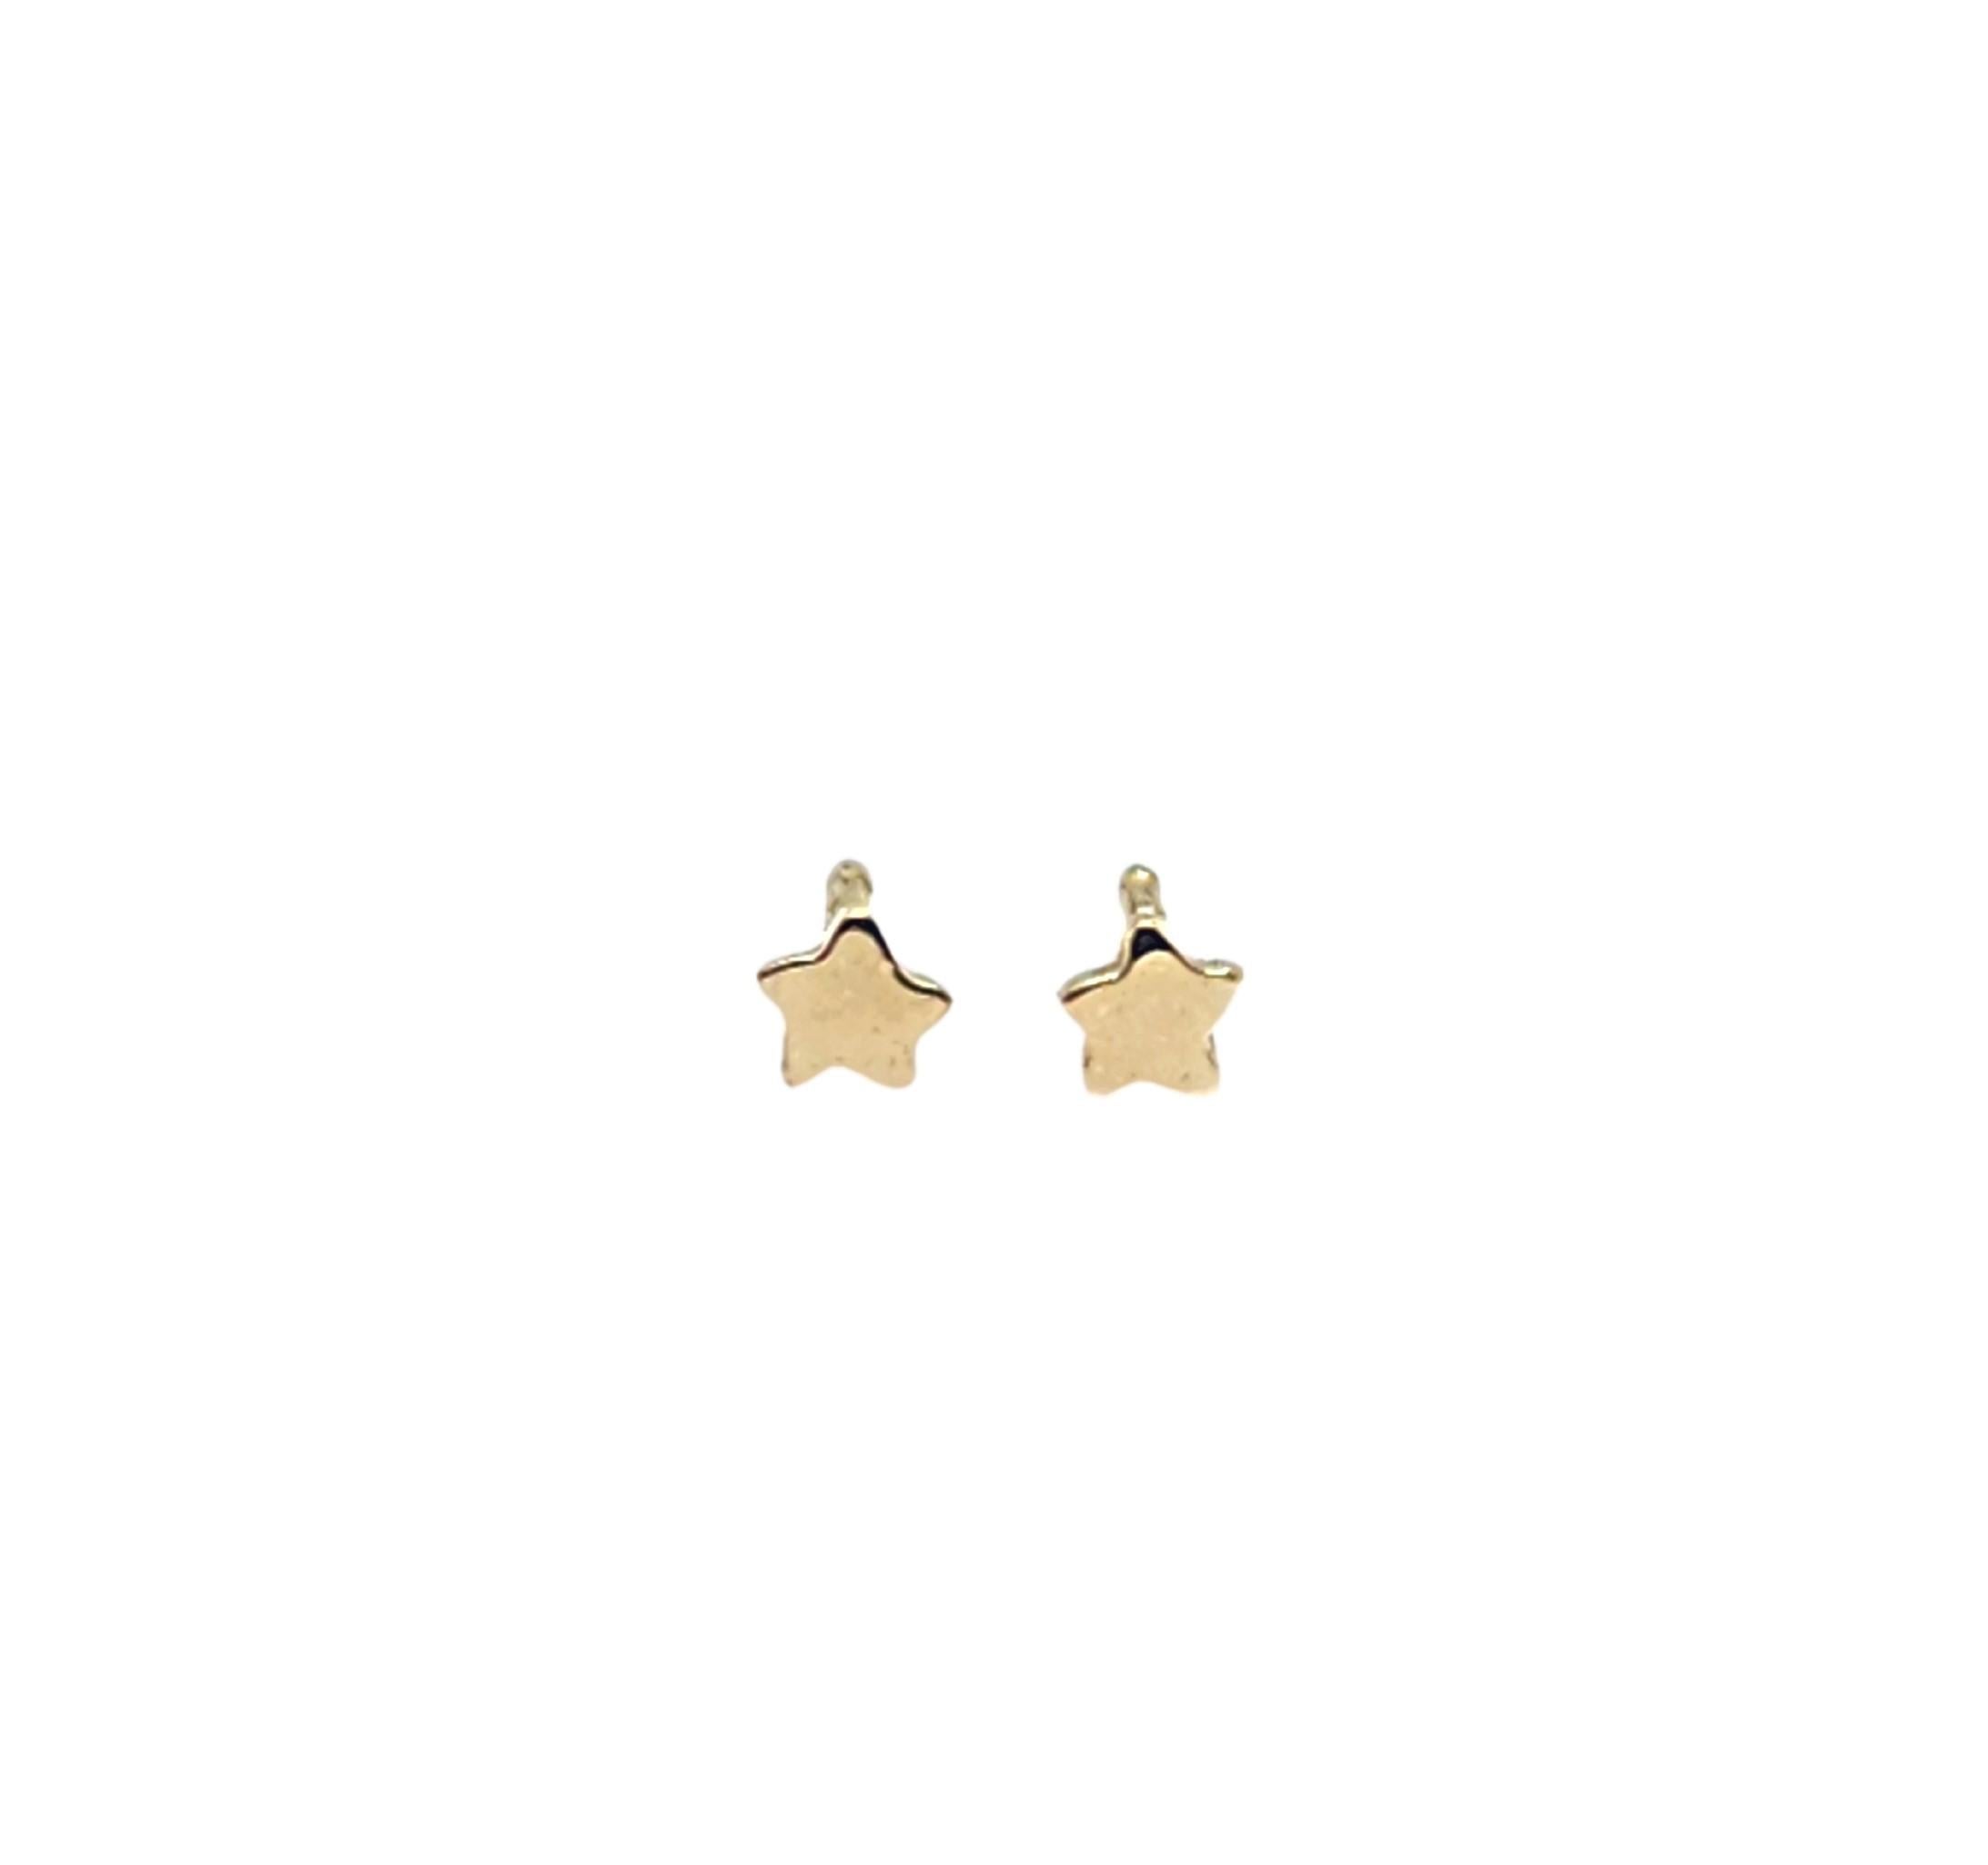 Alison Nagasue Star Power Mini Stud Earrings in 18K Gold In New Condition For Sale In Rutherford, NJ